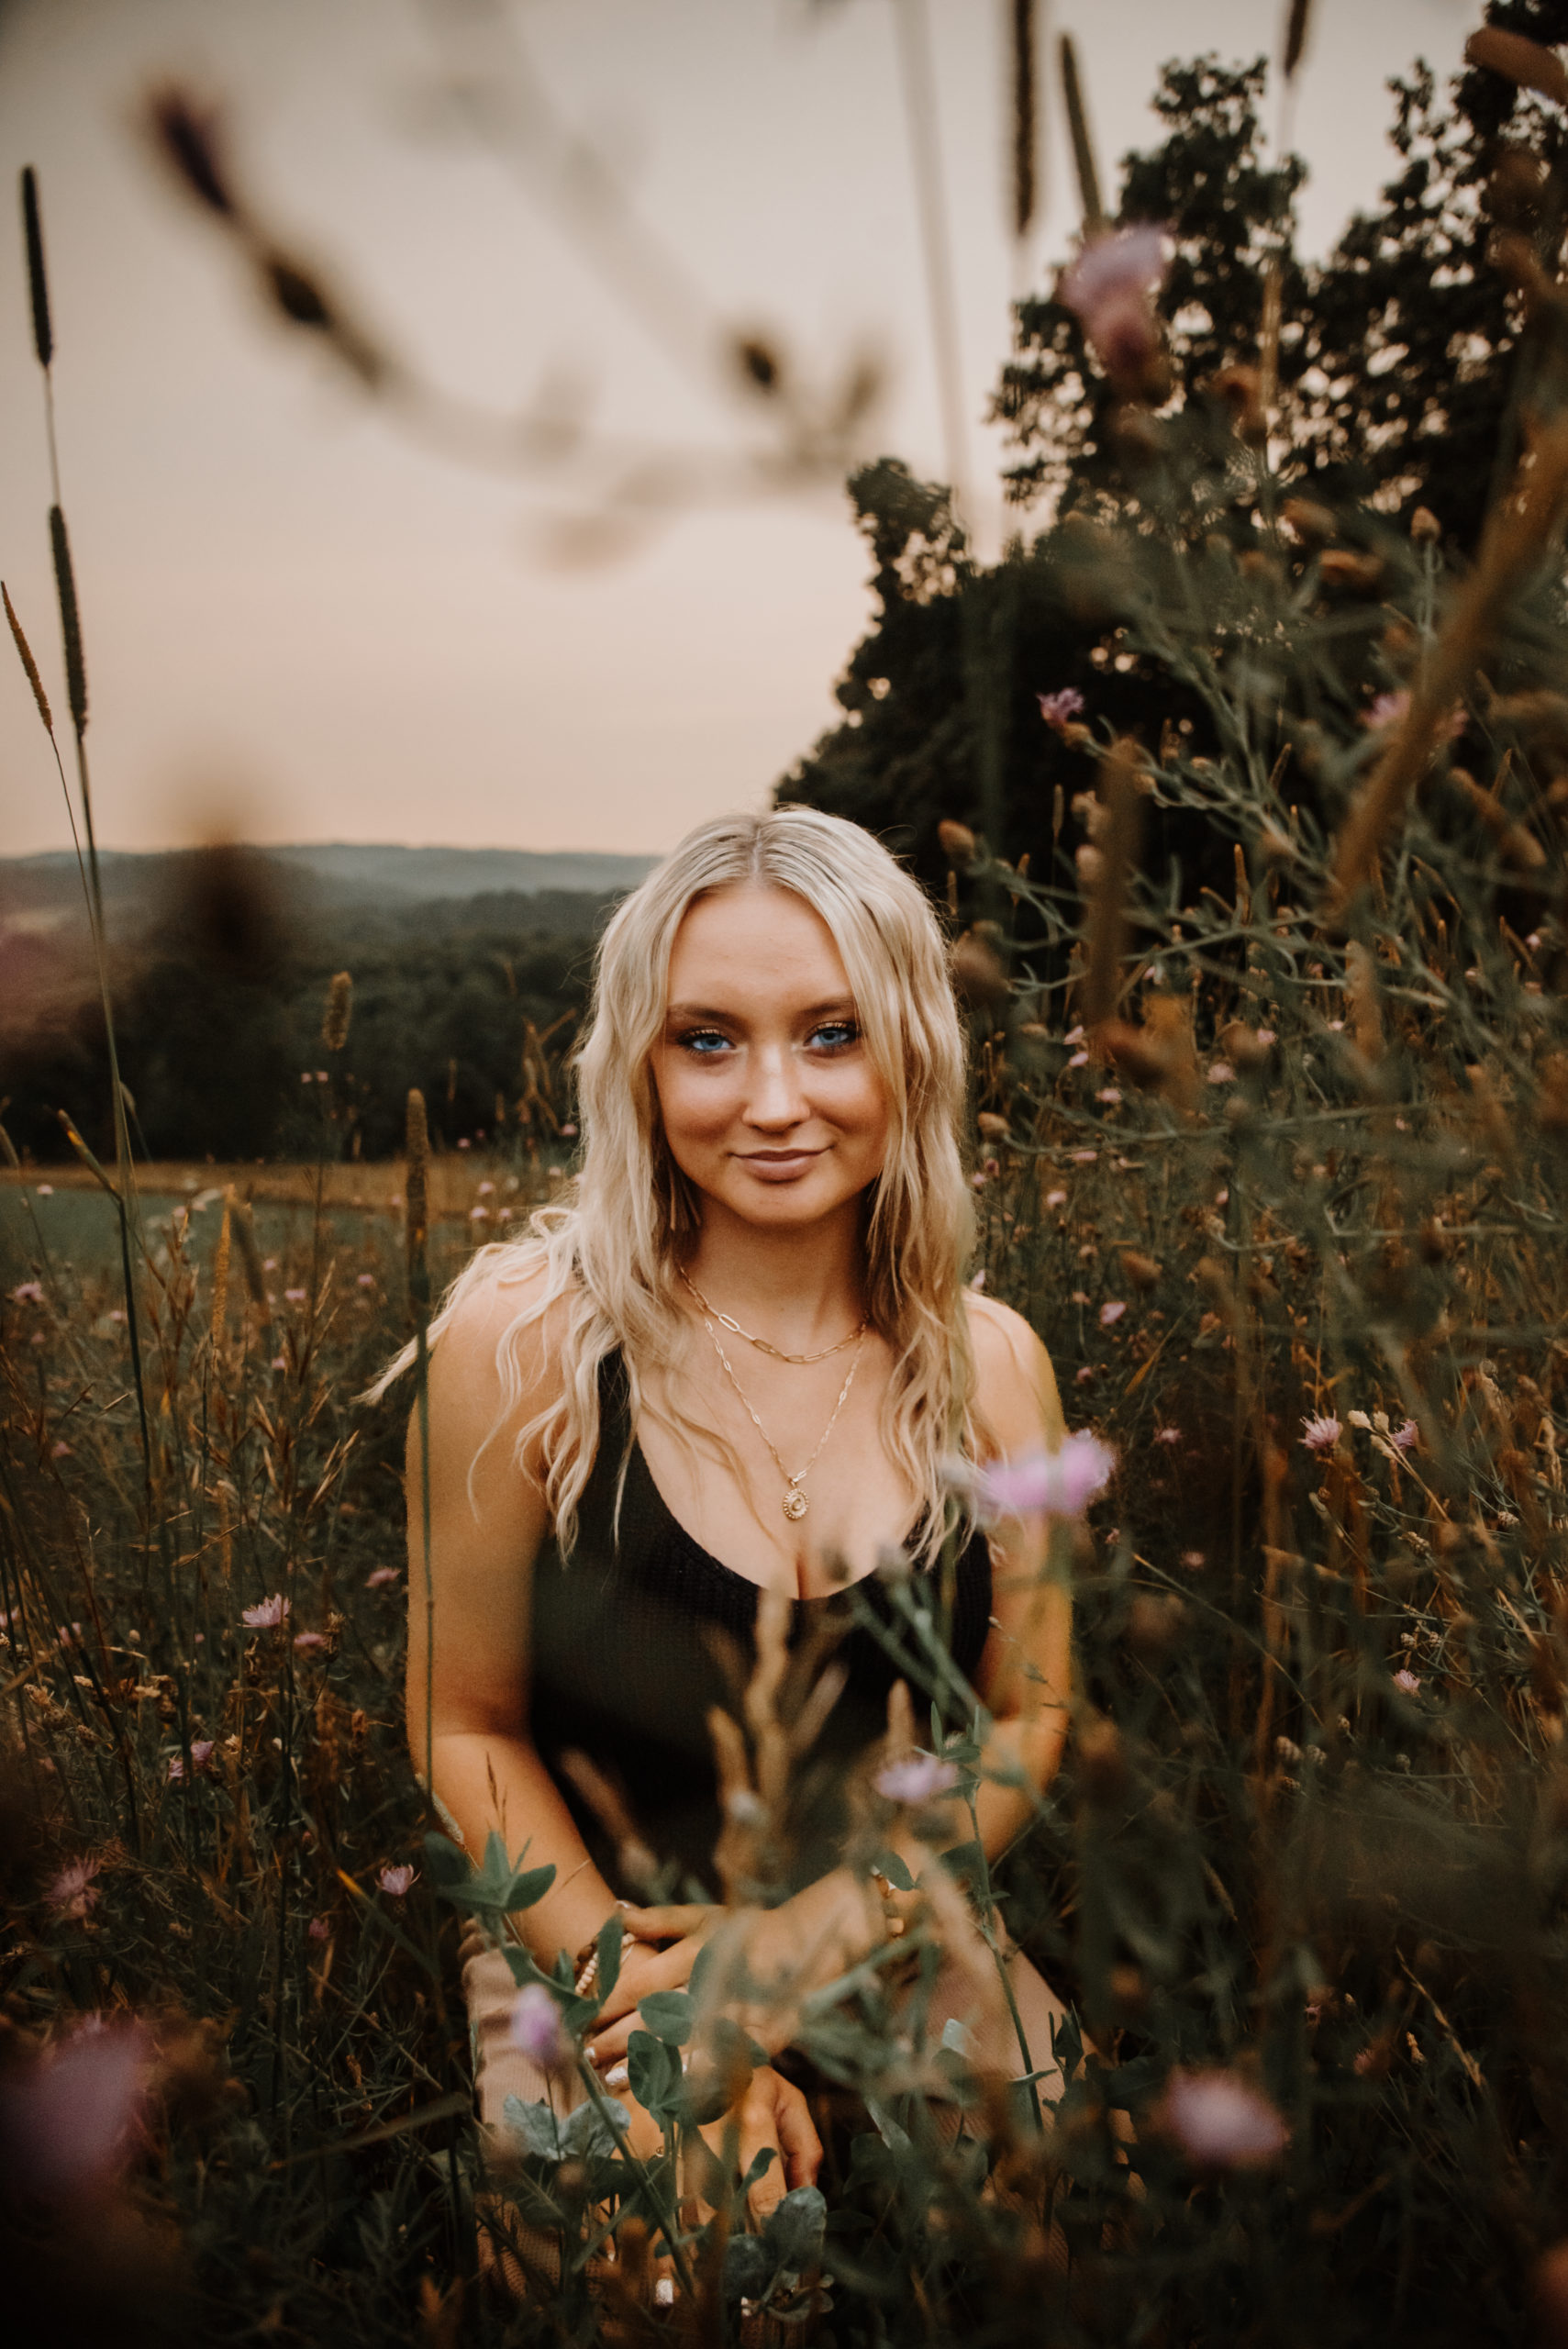 A blonde woman sitting in a field of wildflowers, enjoying the beauty of nature.